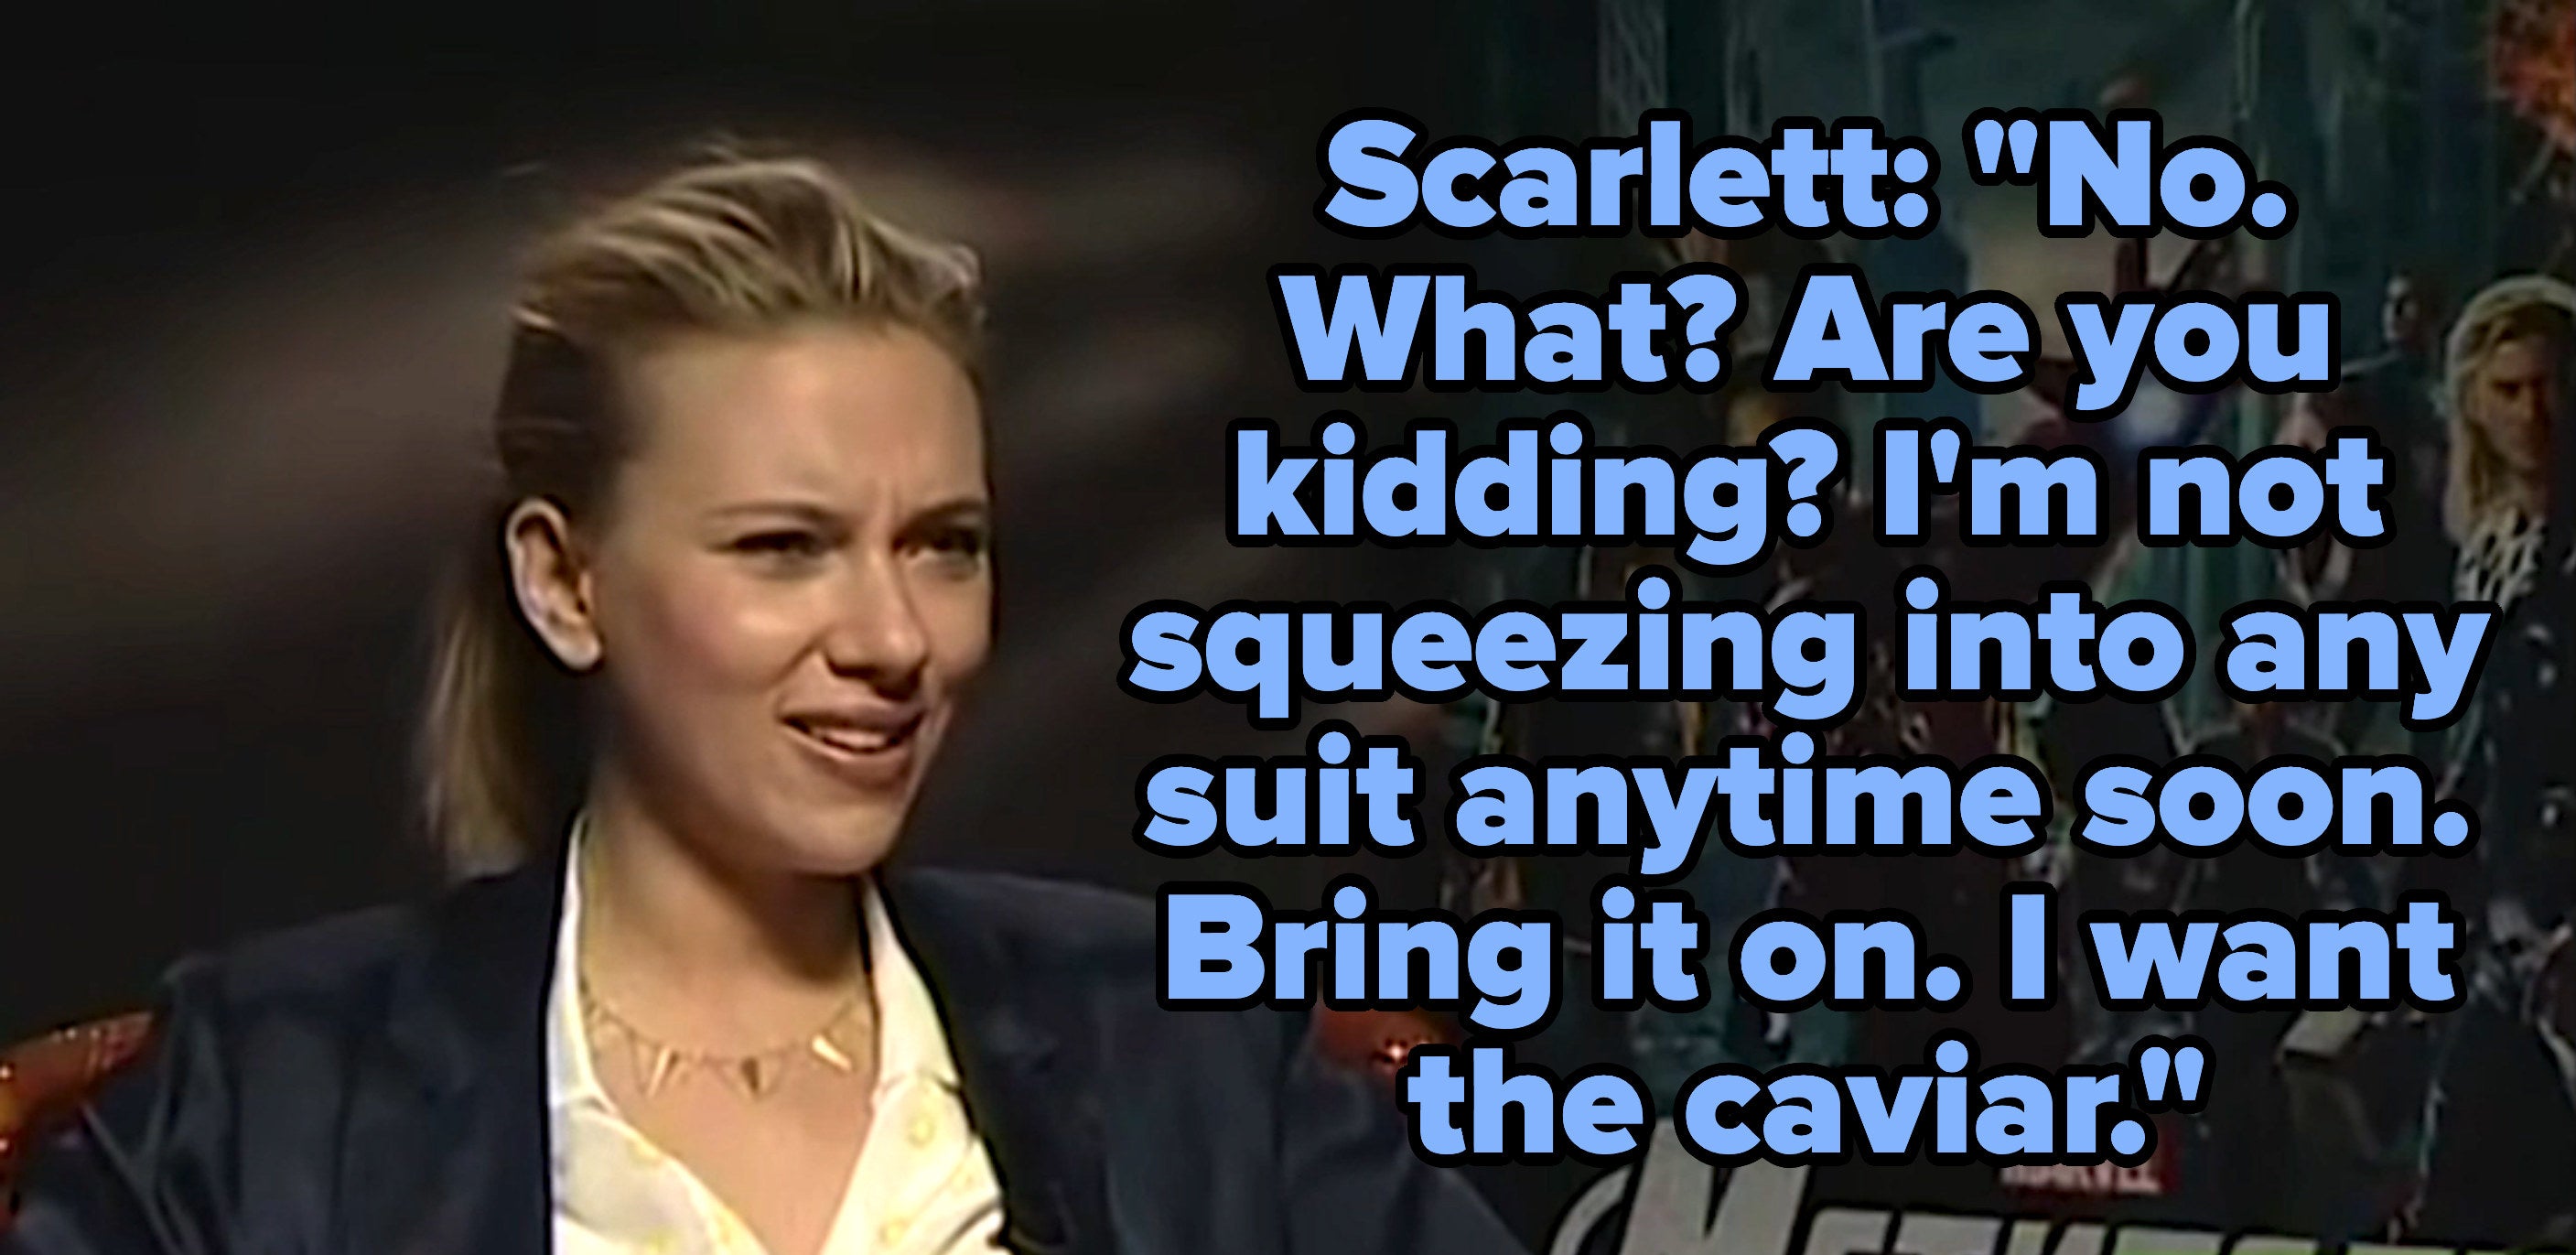 Scarlett: no are you kidding me? Bring it on, I want the caviar